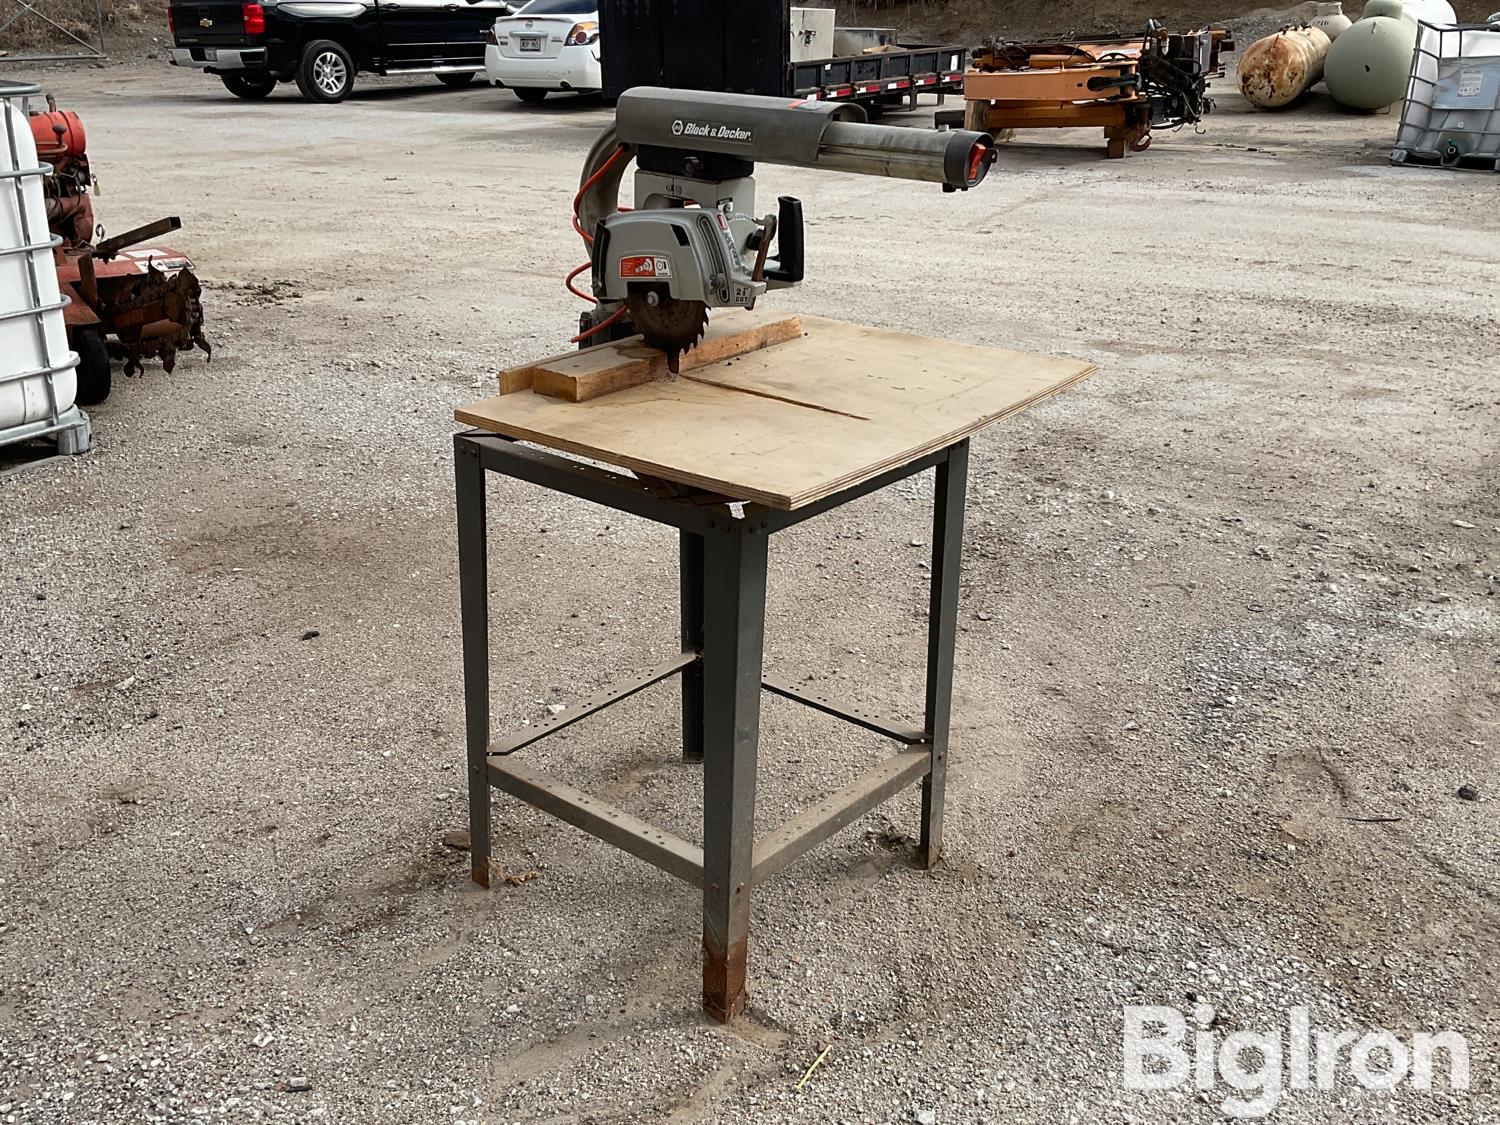 Compact Radial Arm Saw by Black & Decker (2 7/8 CUT) - Tools - East Meadow,  New York, Facebook Marketplace